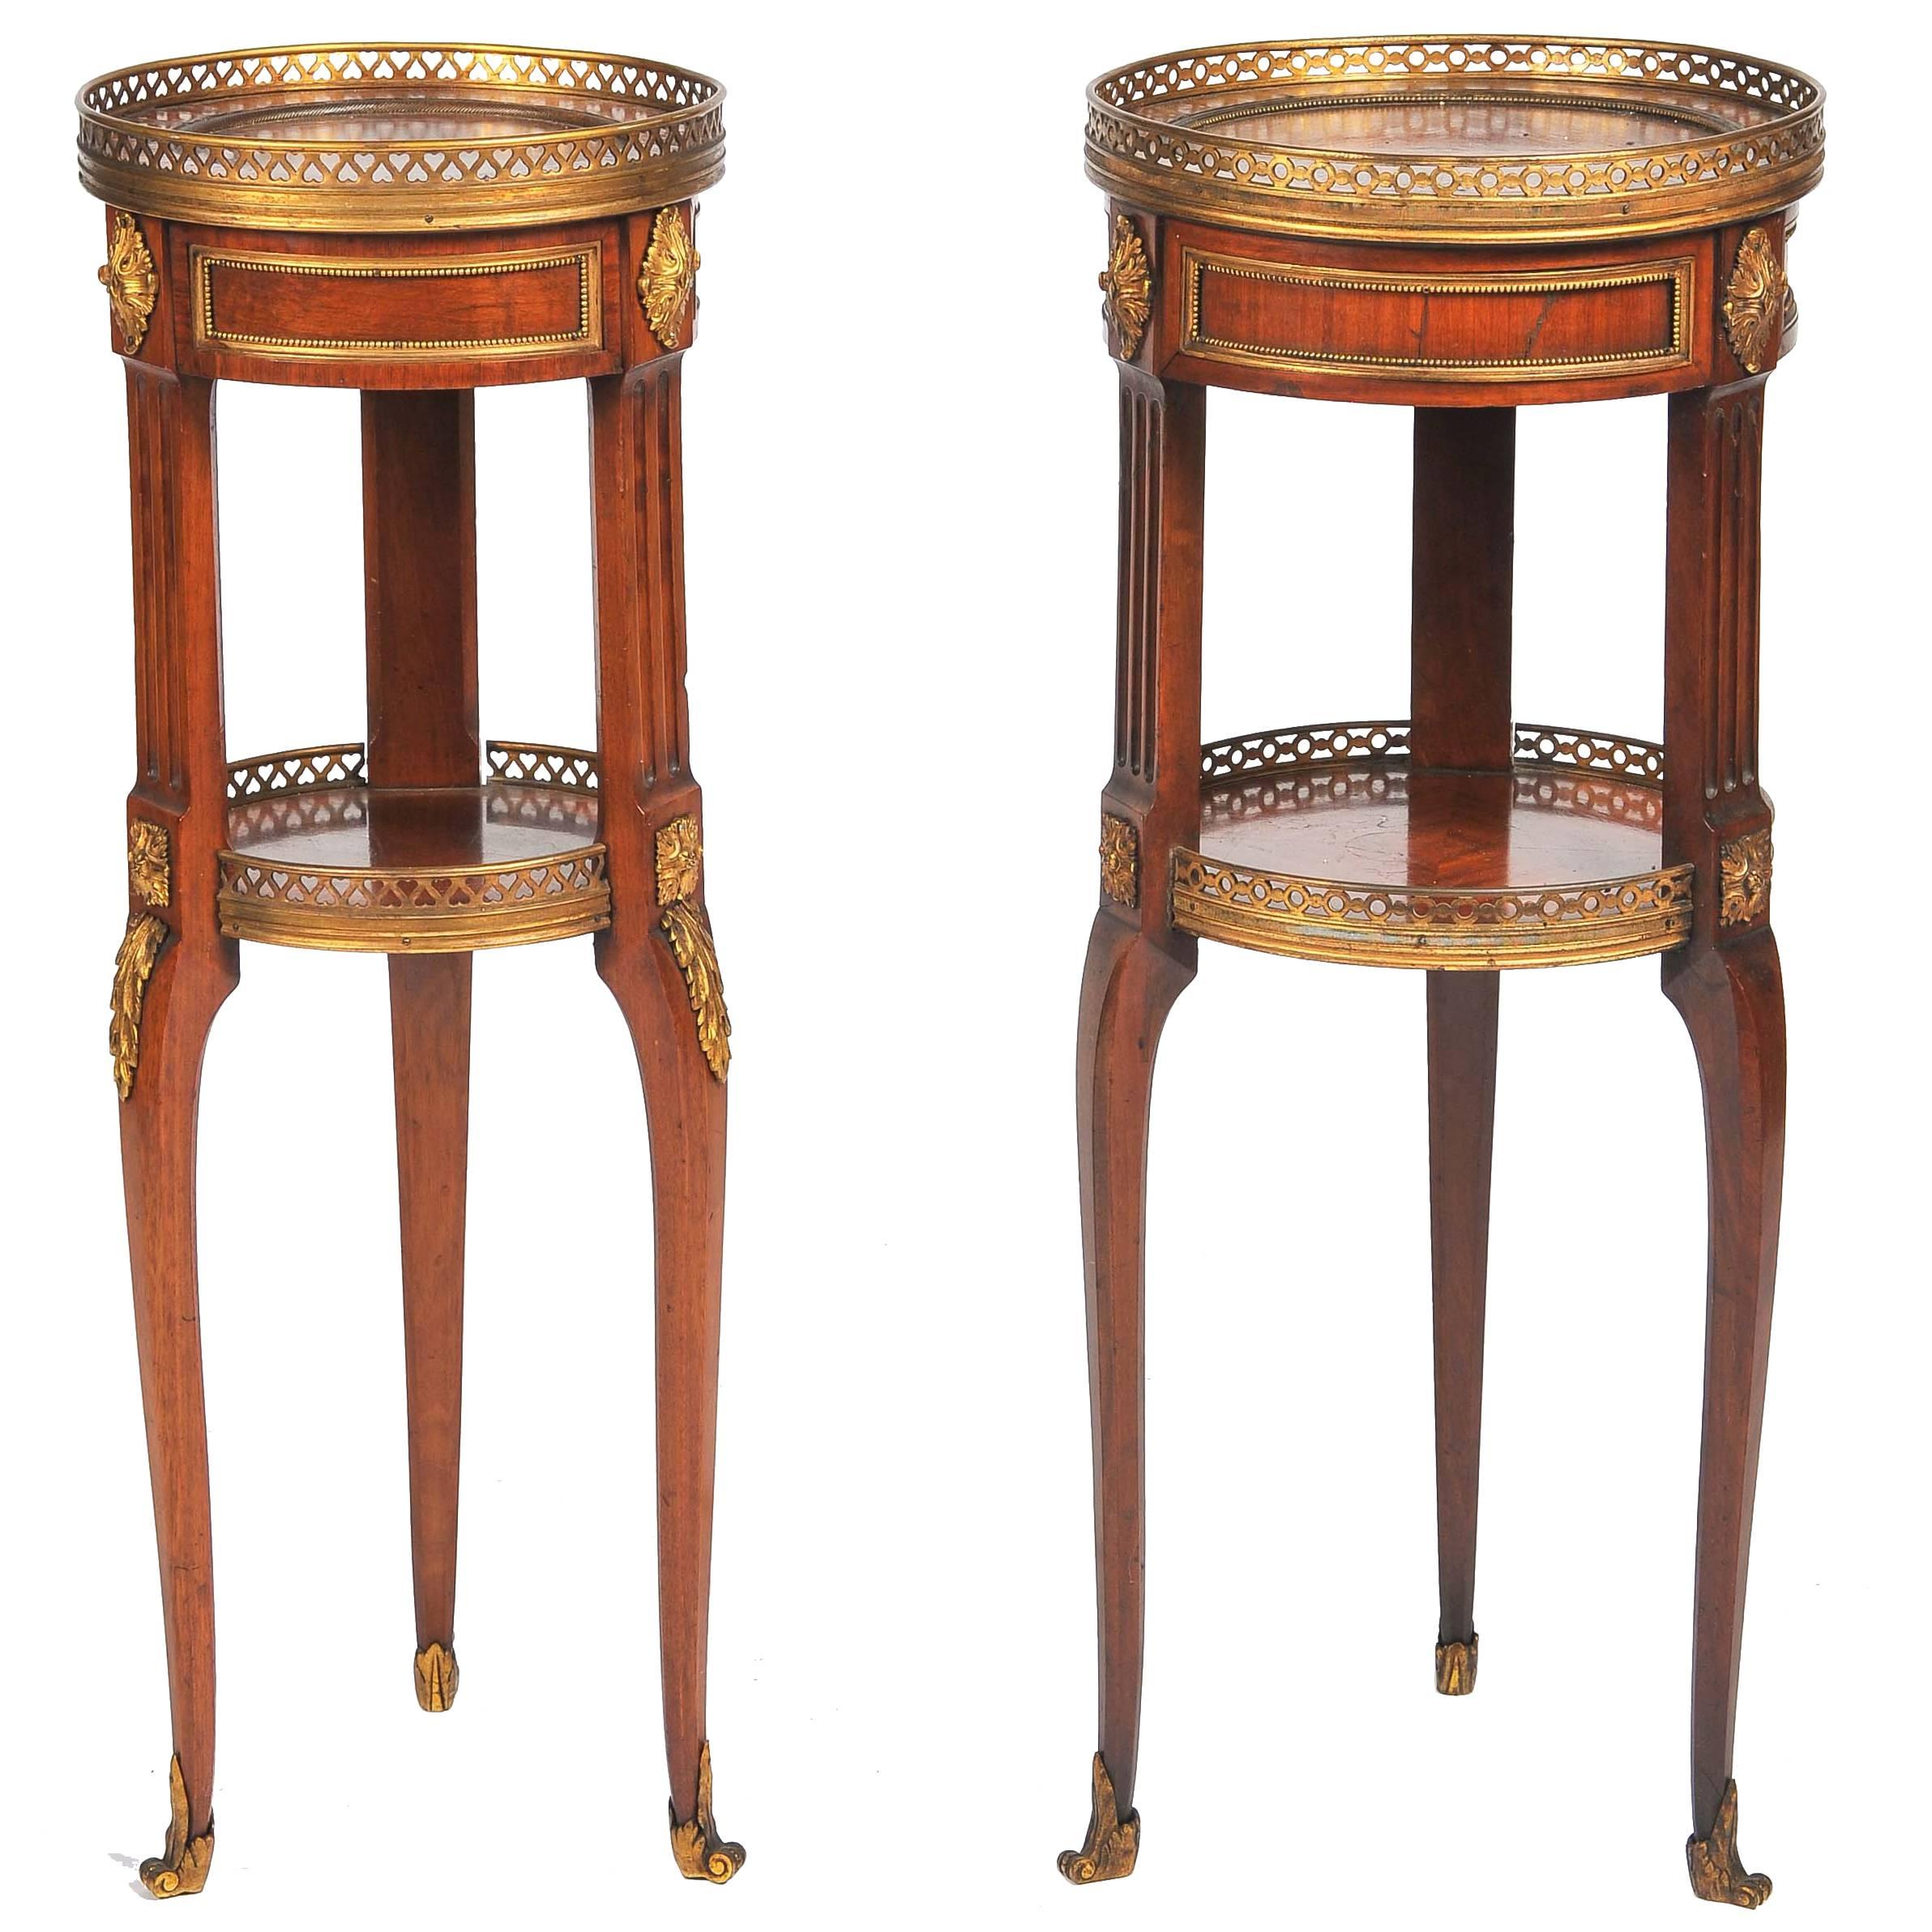 Near Pair of Empire Influenced Side Tables, 19th Century